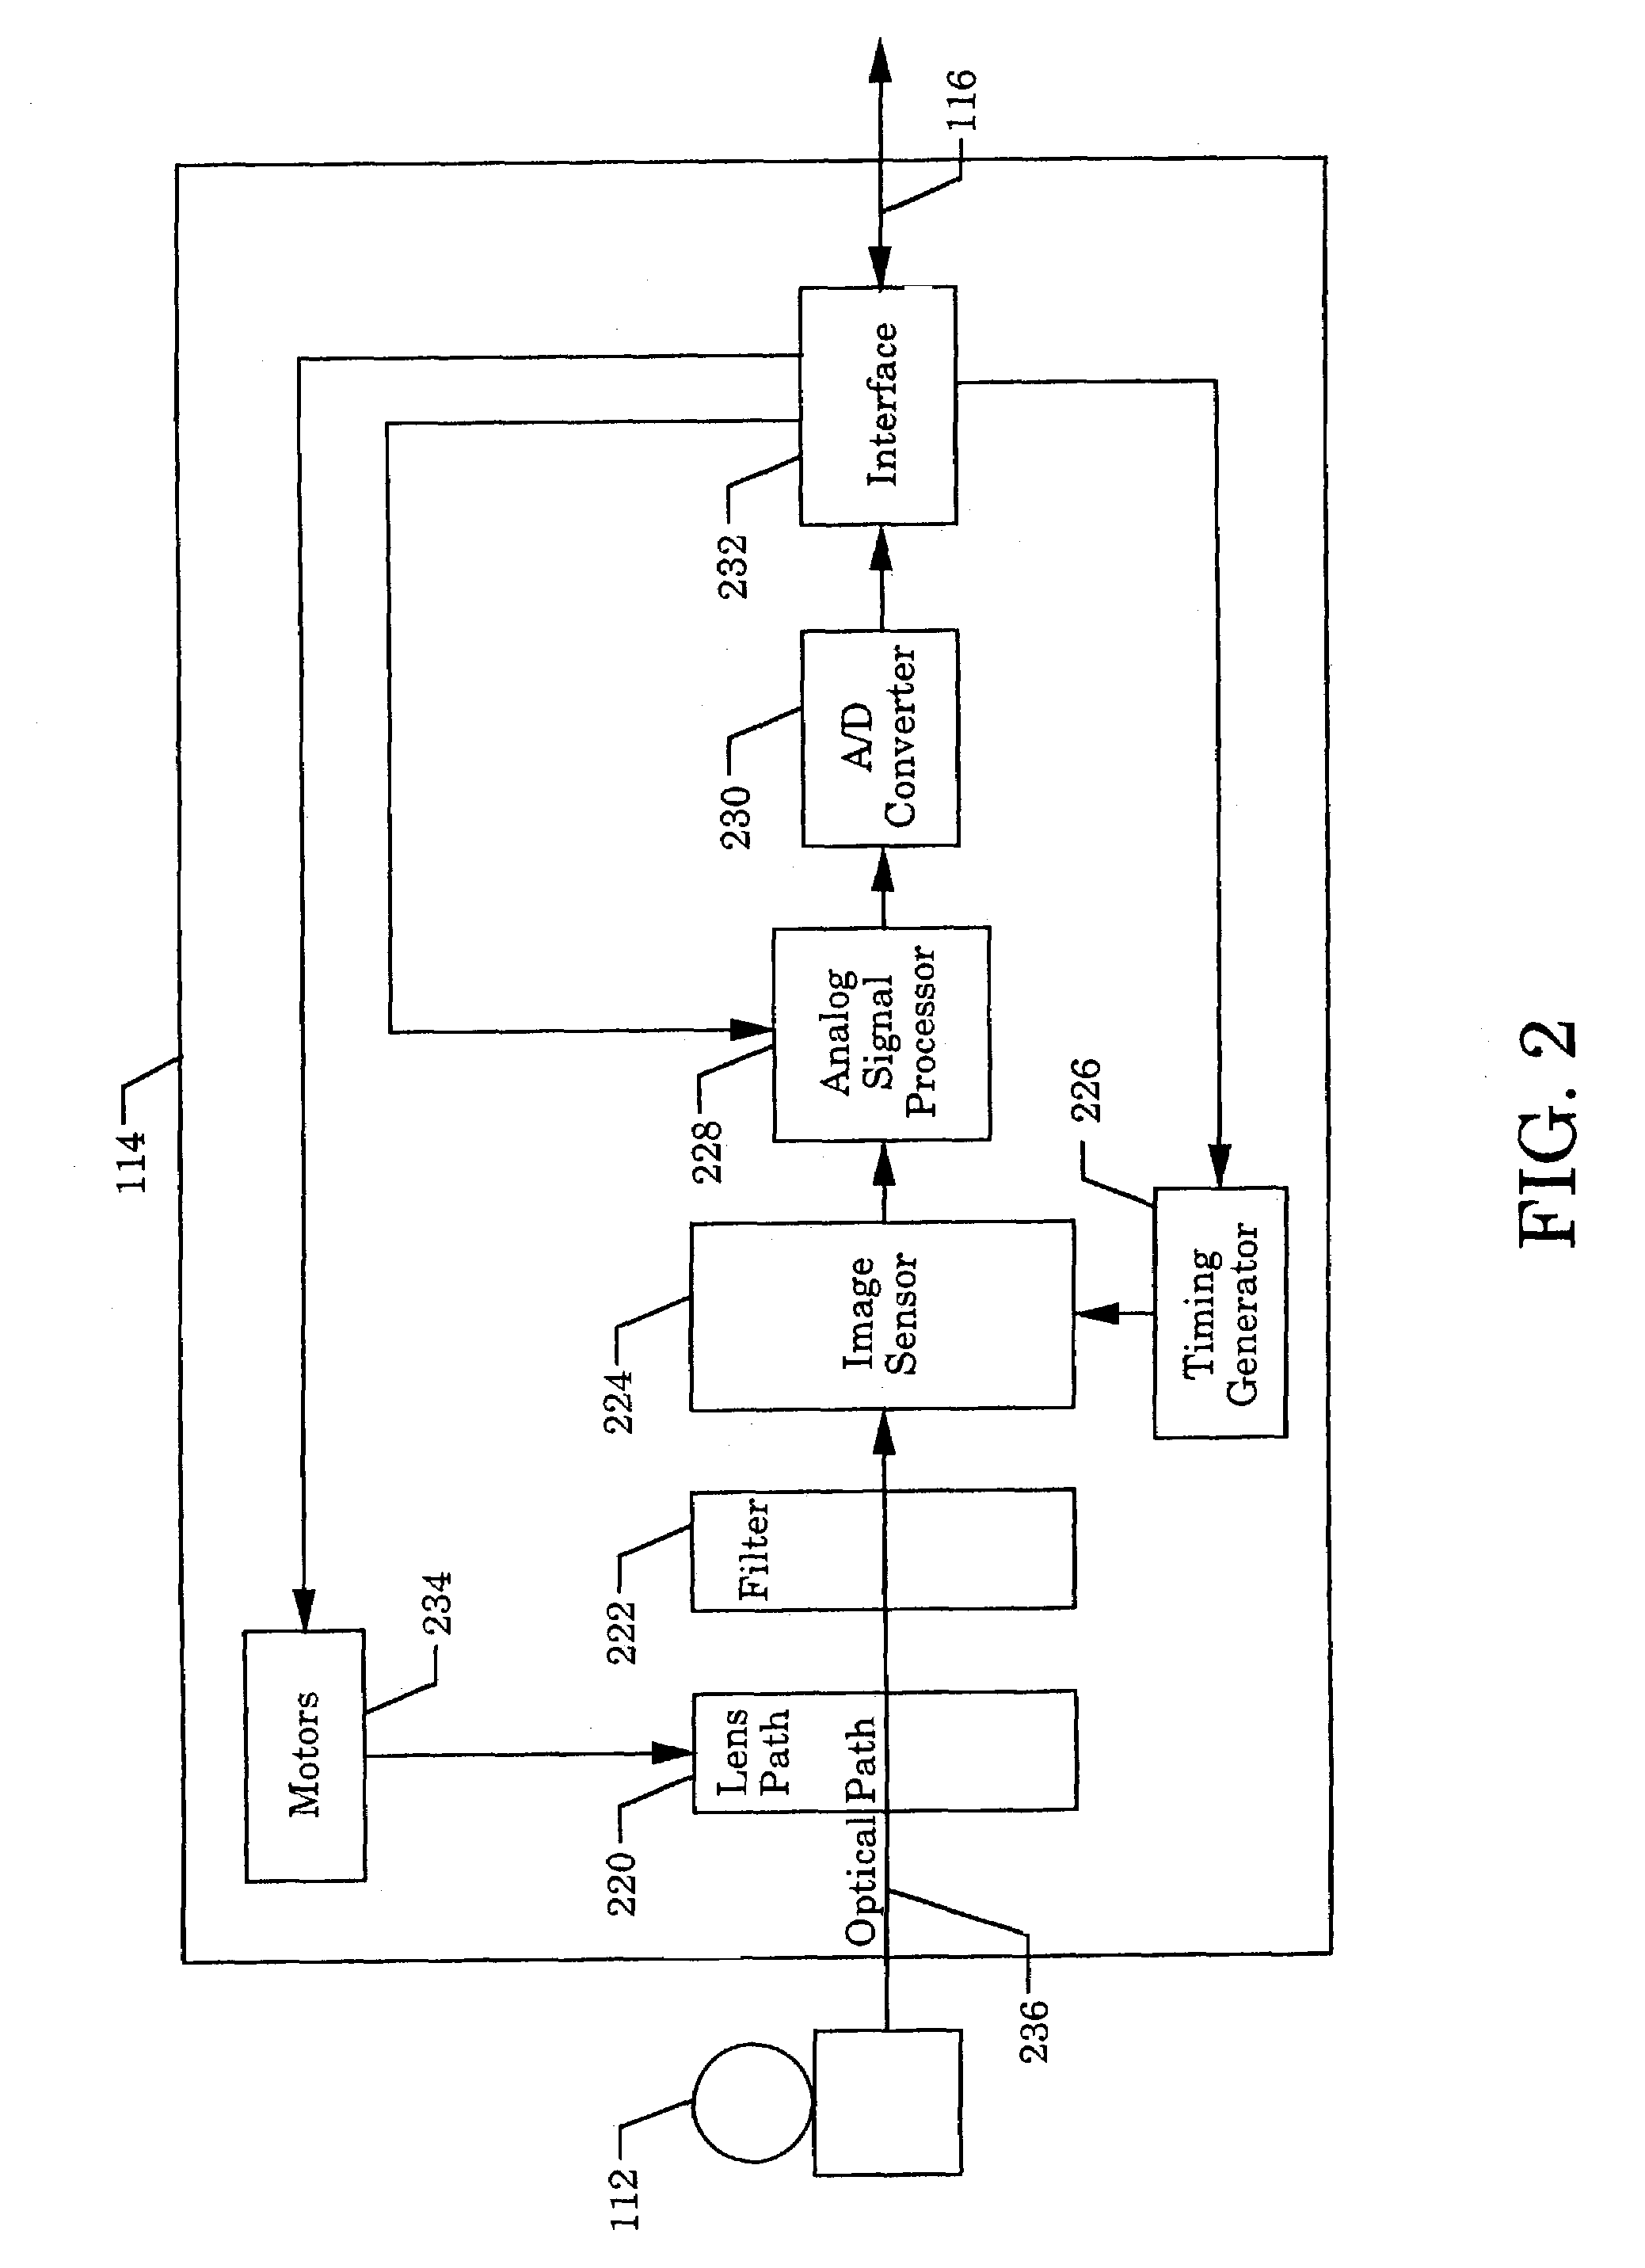 Method and system for hosting a web site on a digital camera